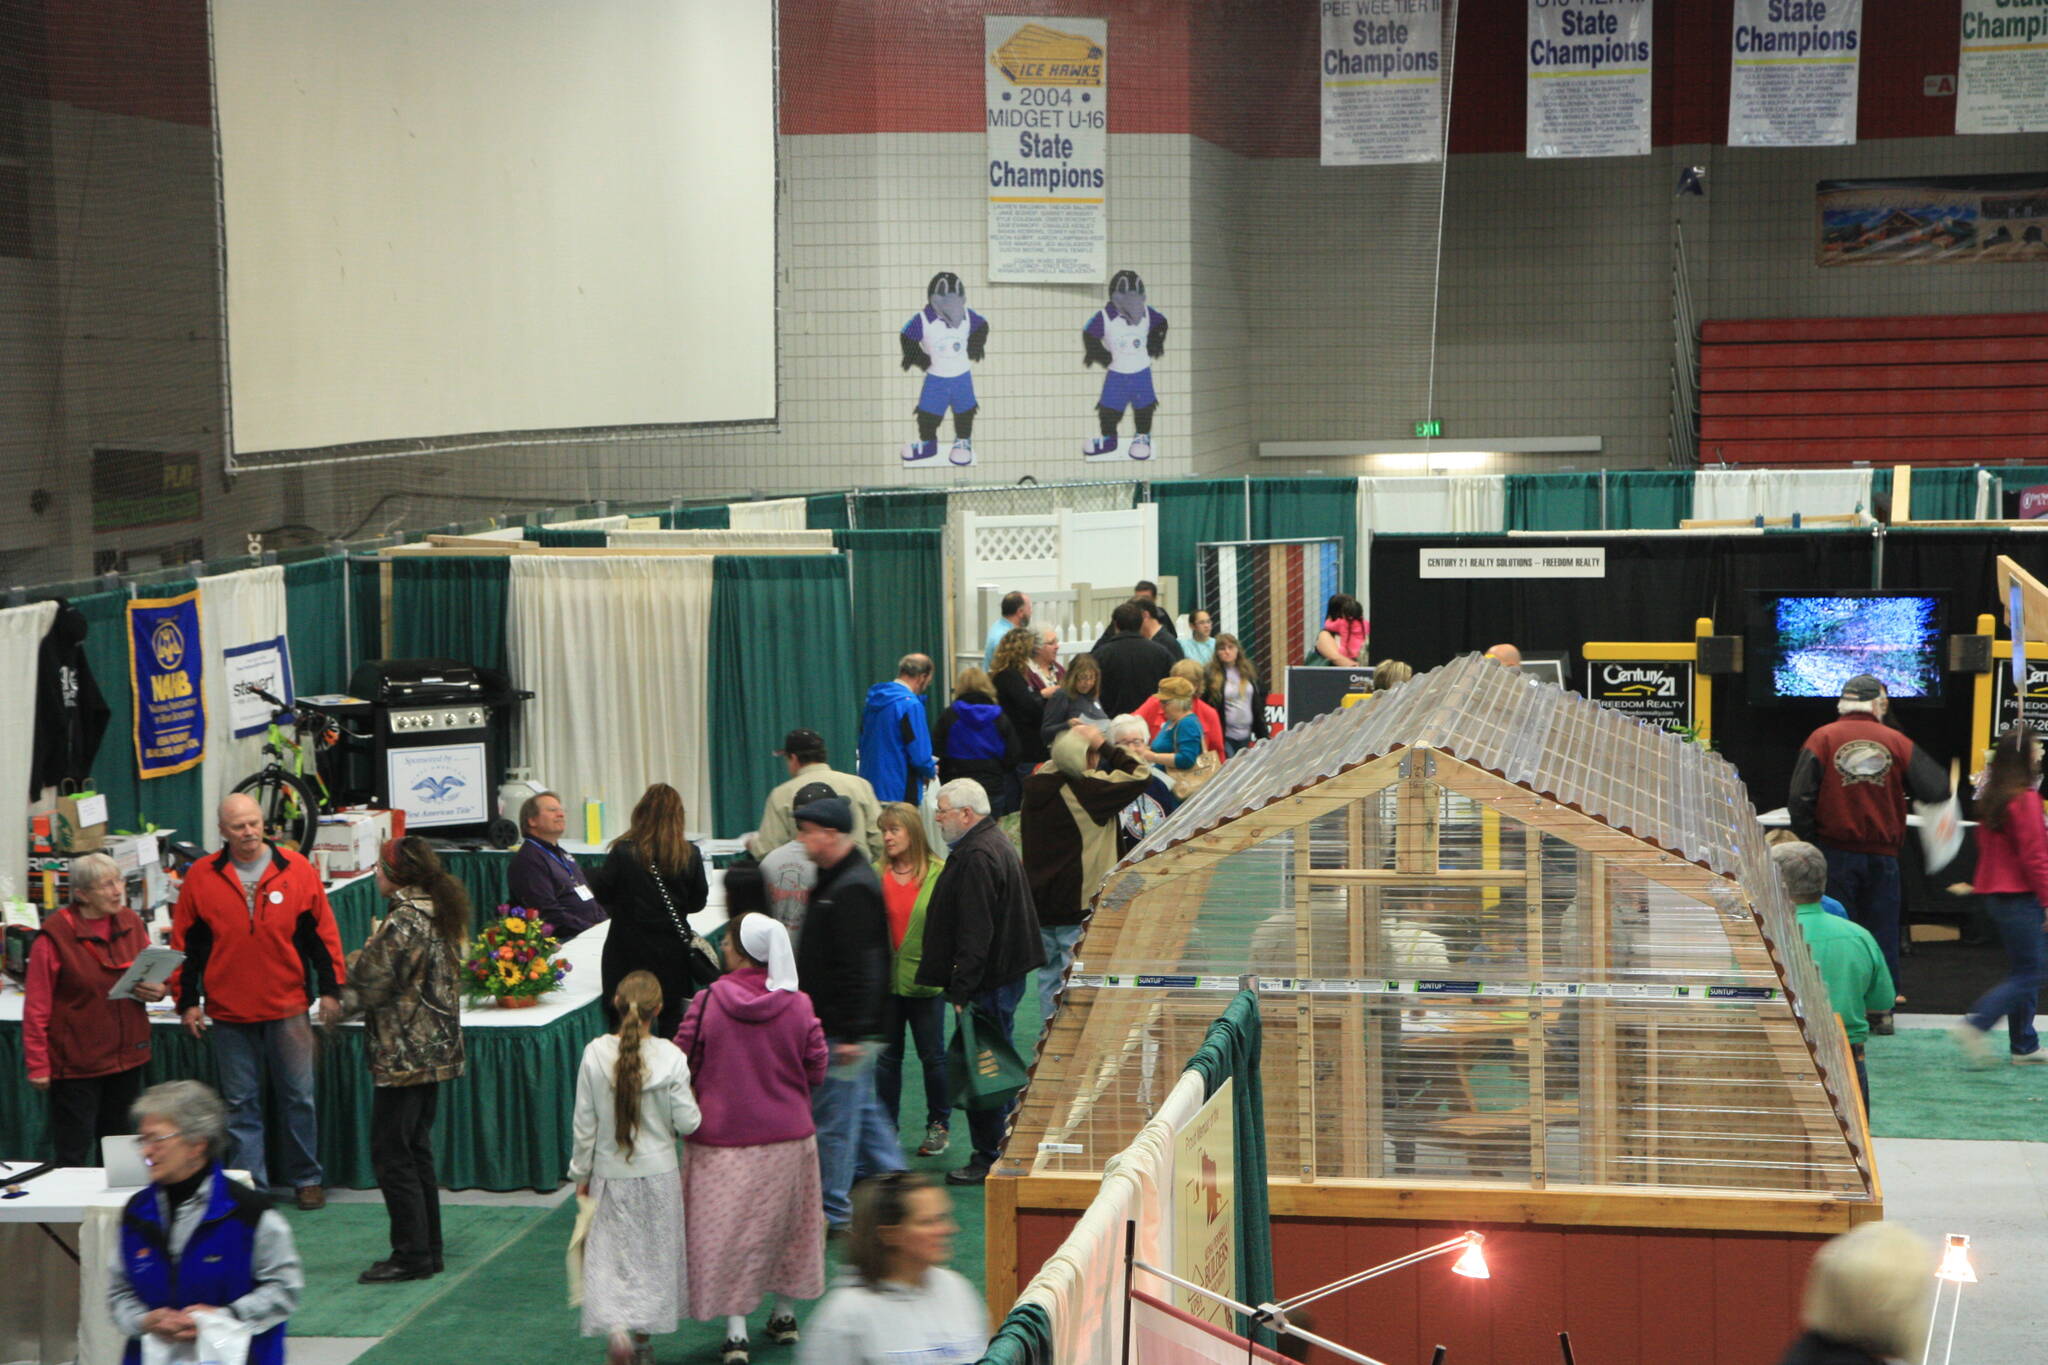 Peninsula residents attend the annual KPBA Home Show at the Soldotna Regional Sports Complex in Soldotna, Alaska, as seen here in this undated photo. (Courtesy of Kirsten Raye)